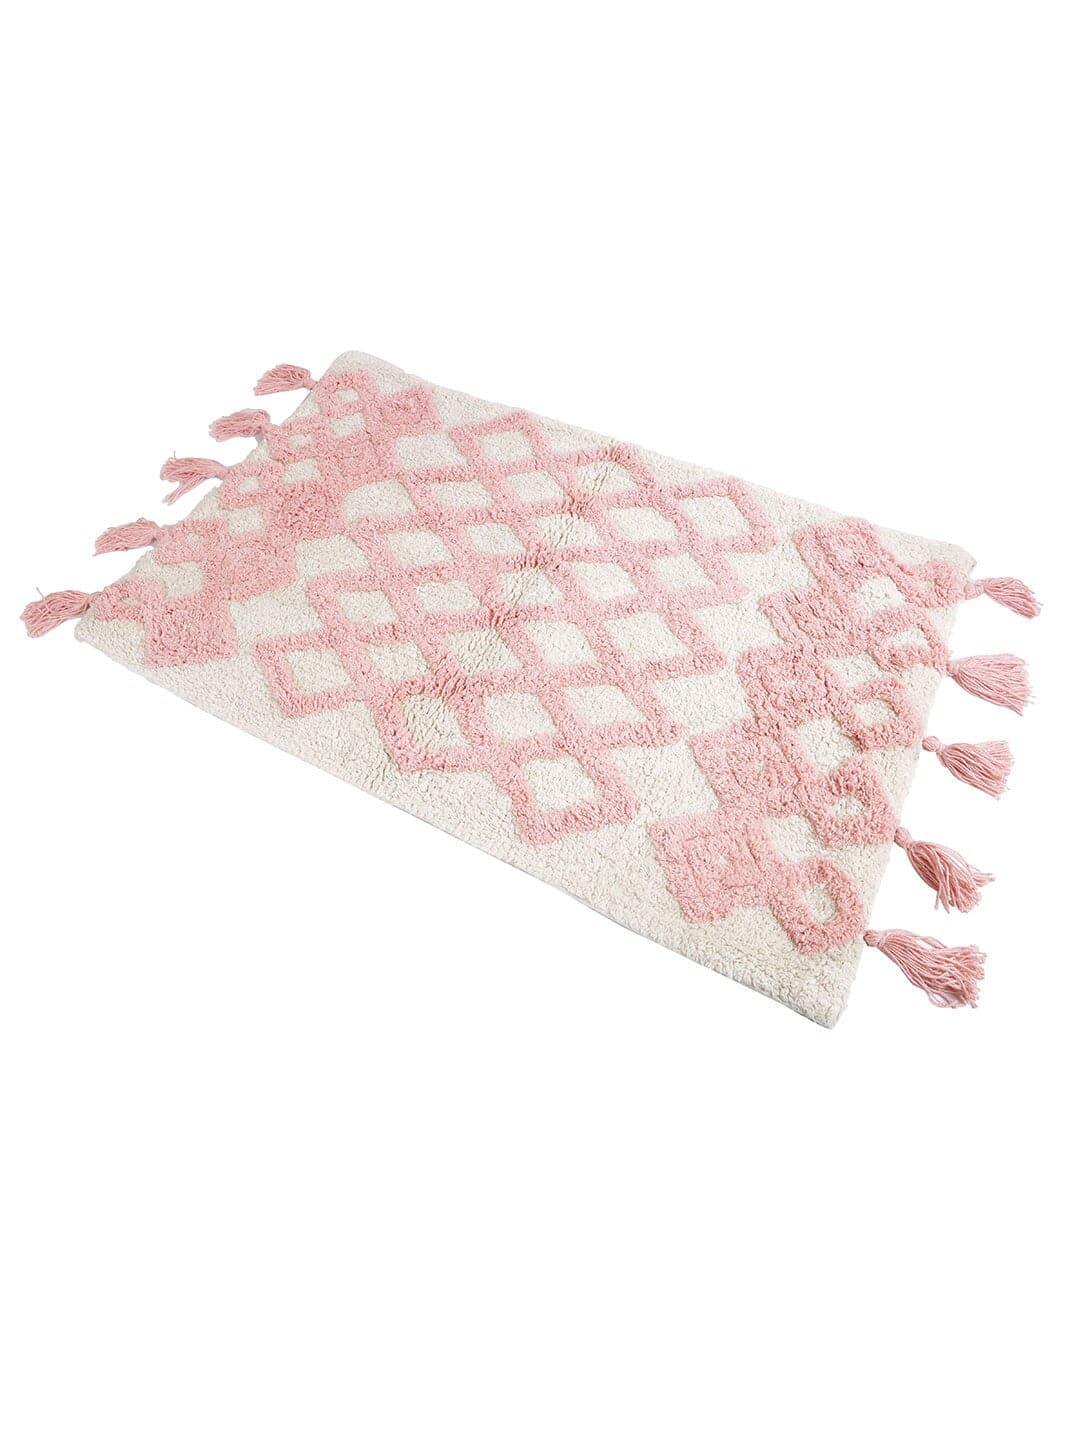 Pink and White Tufted Cotton Bath Mat Washable Bathroom Mat Soft